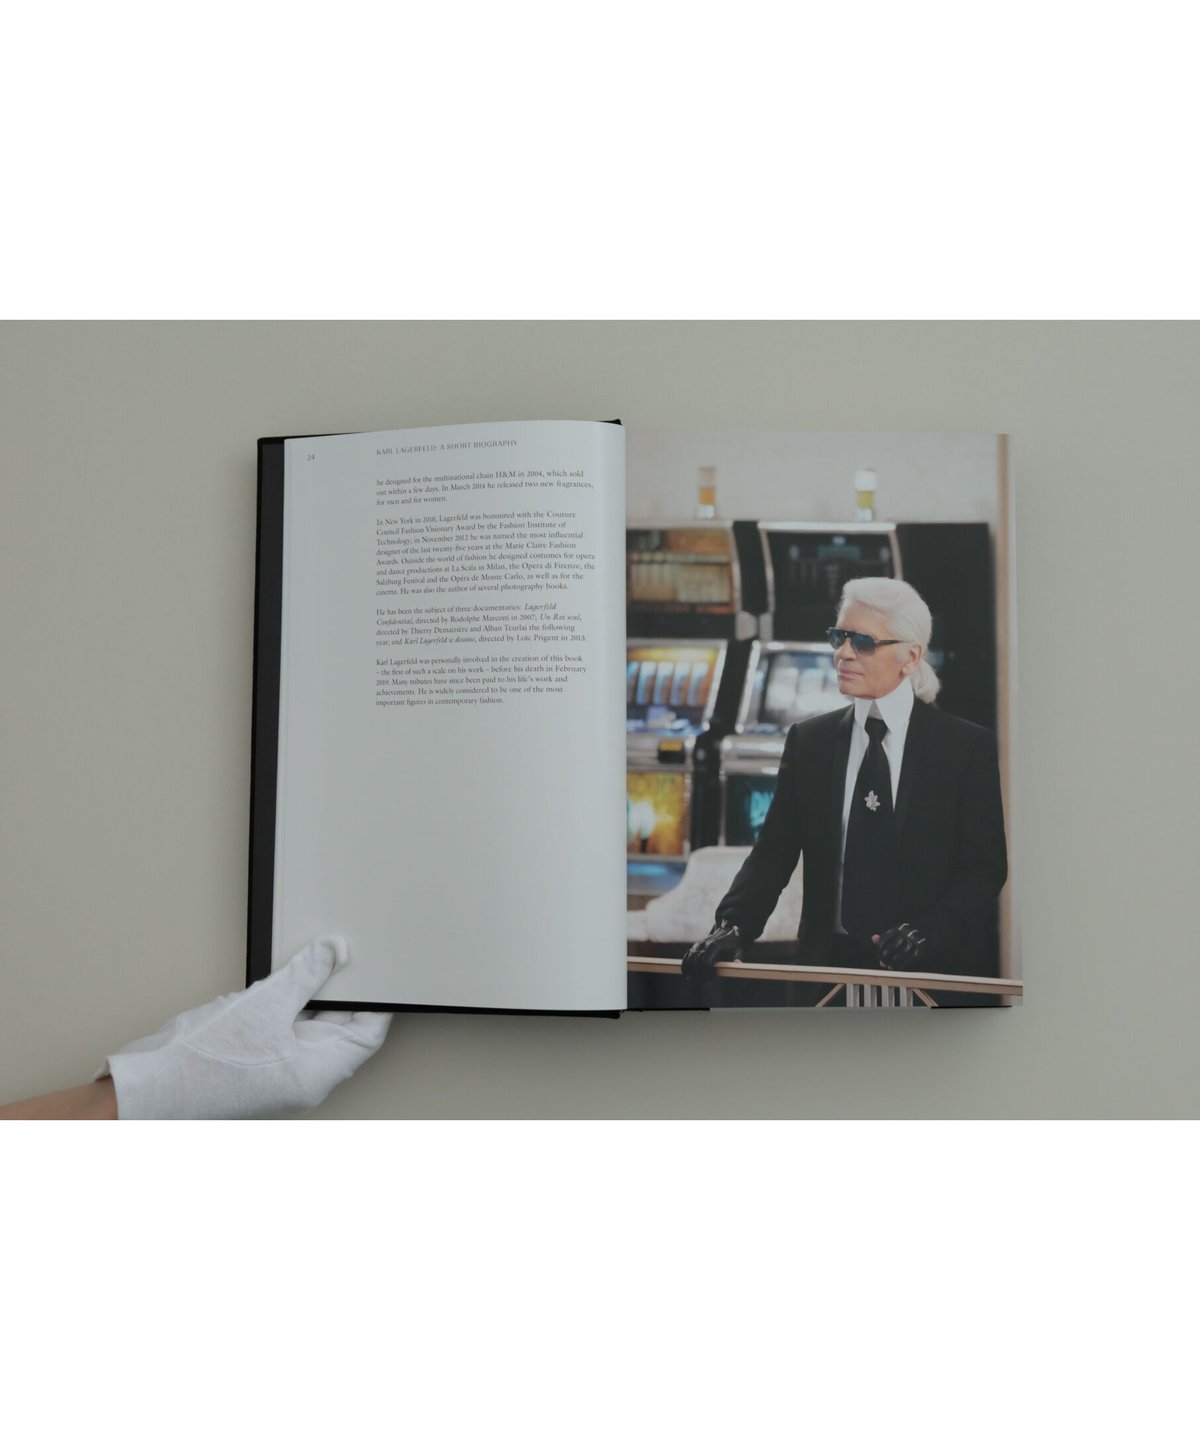 Chanel Catwalk: The Complete Collection Hardcover book by Patrick Mauriés  and Adélia Sabatini